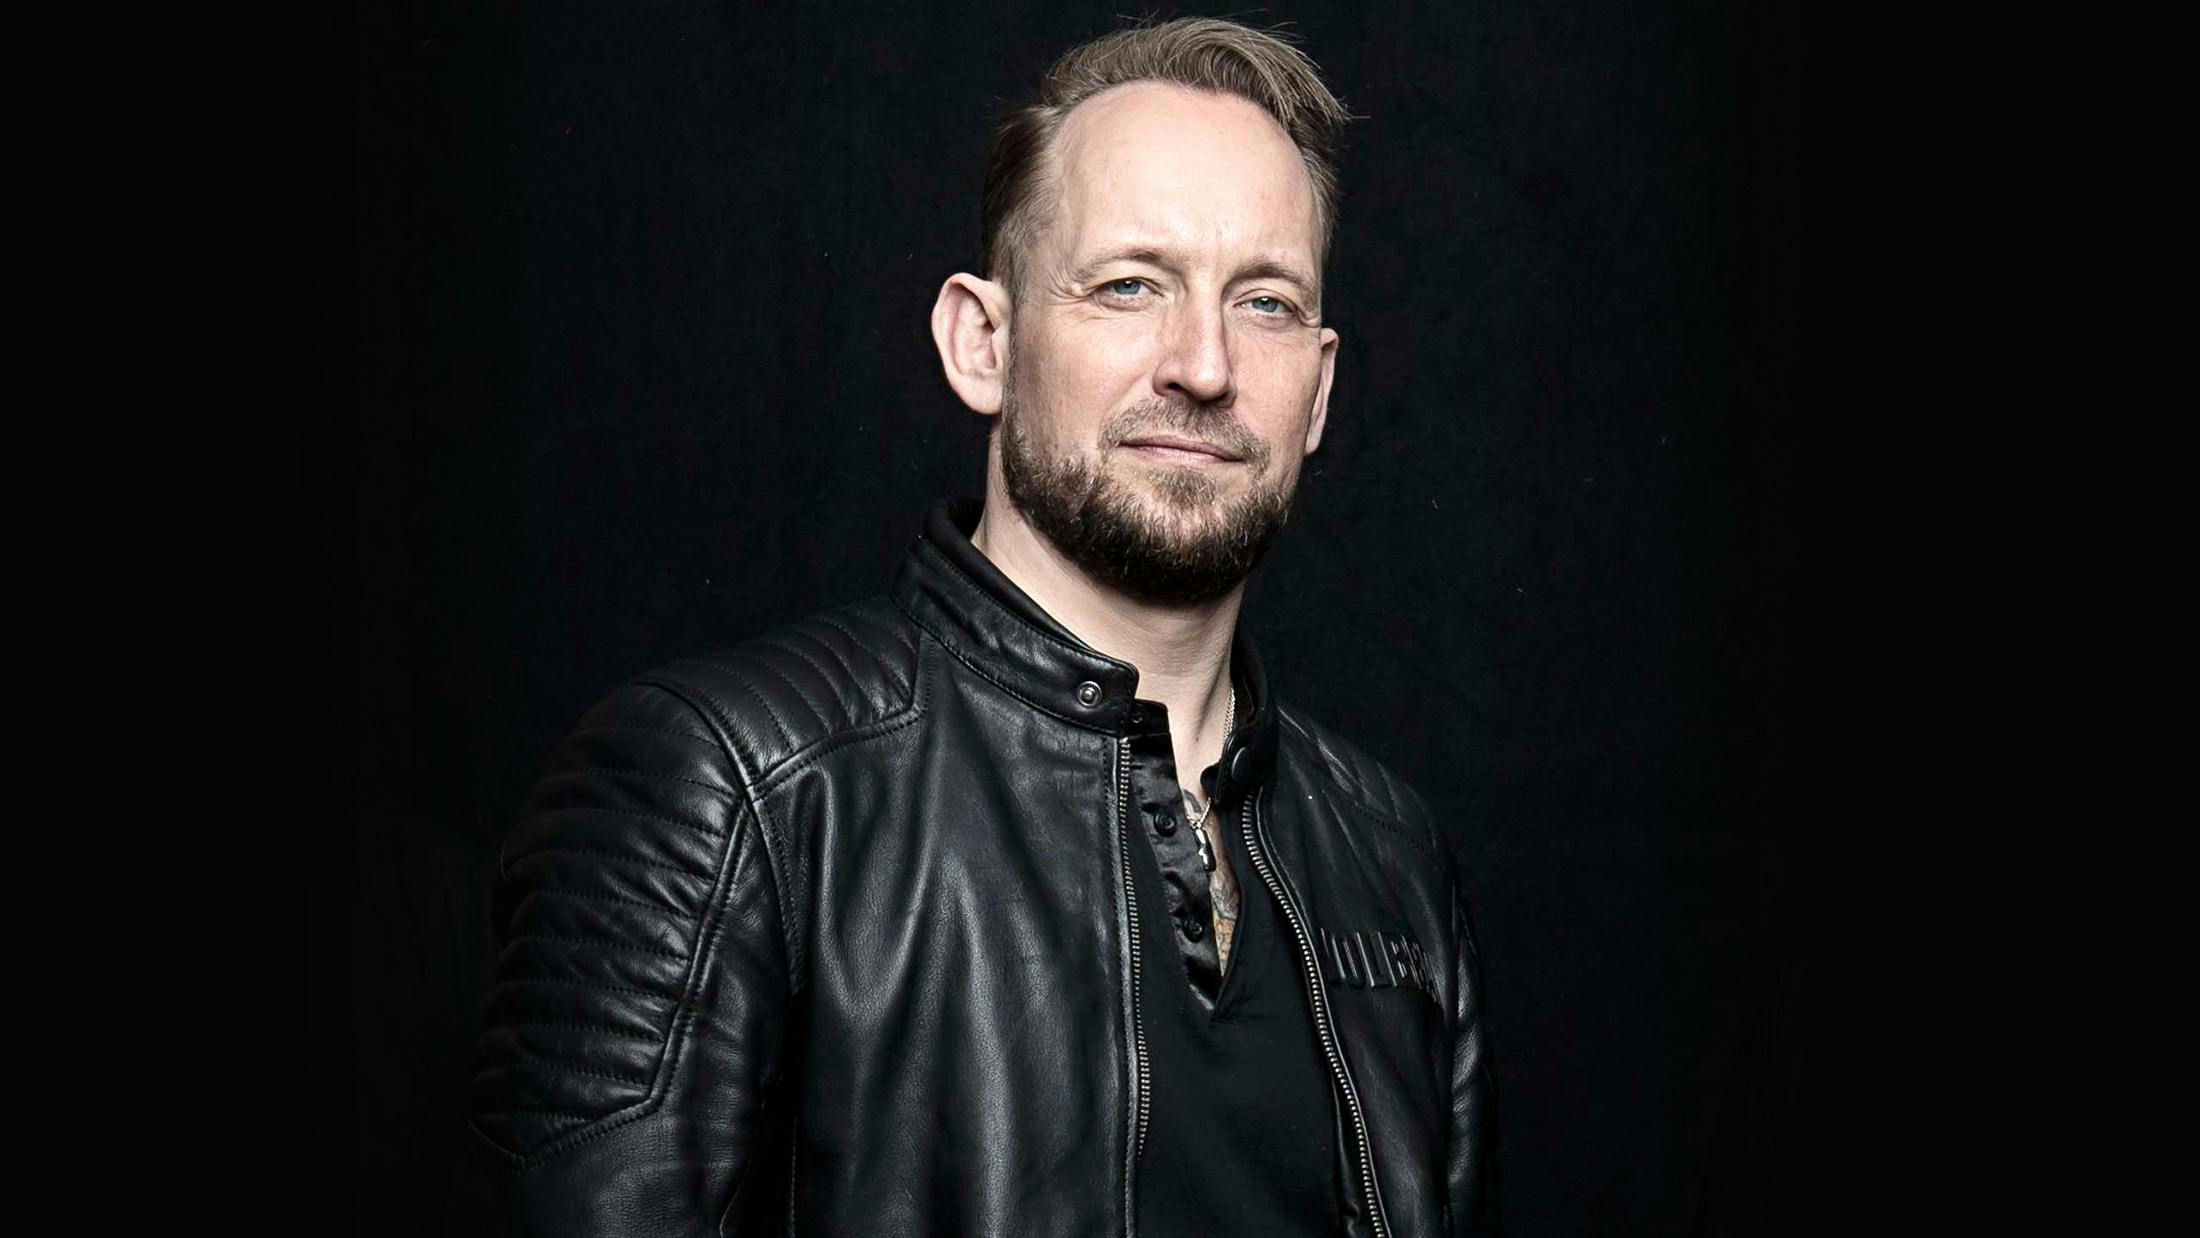 Volbeat's Michael Poulsen: The 10 Songs That Changed My Life